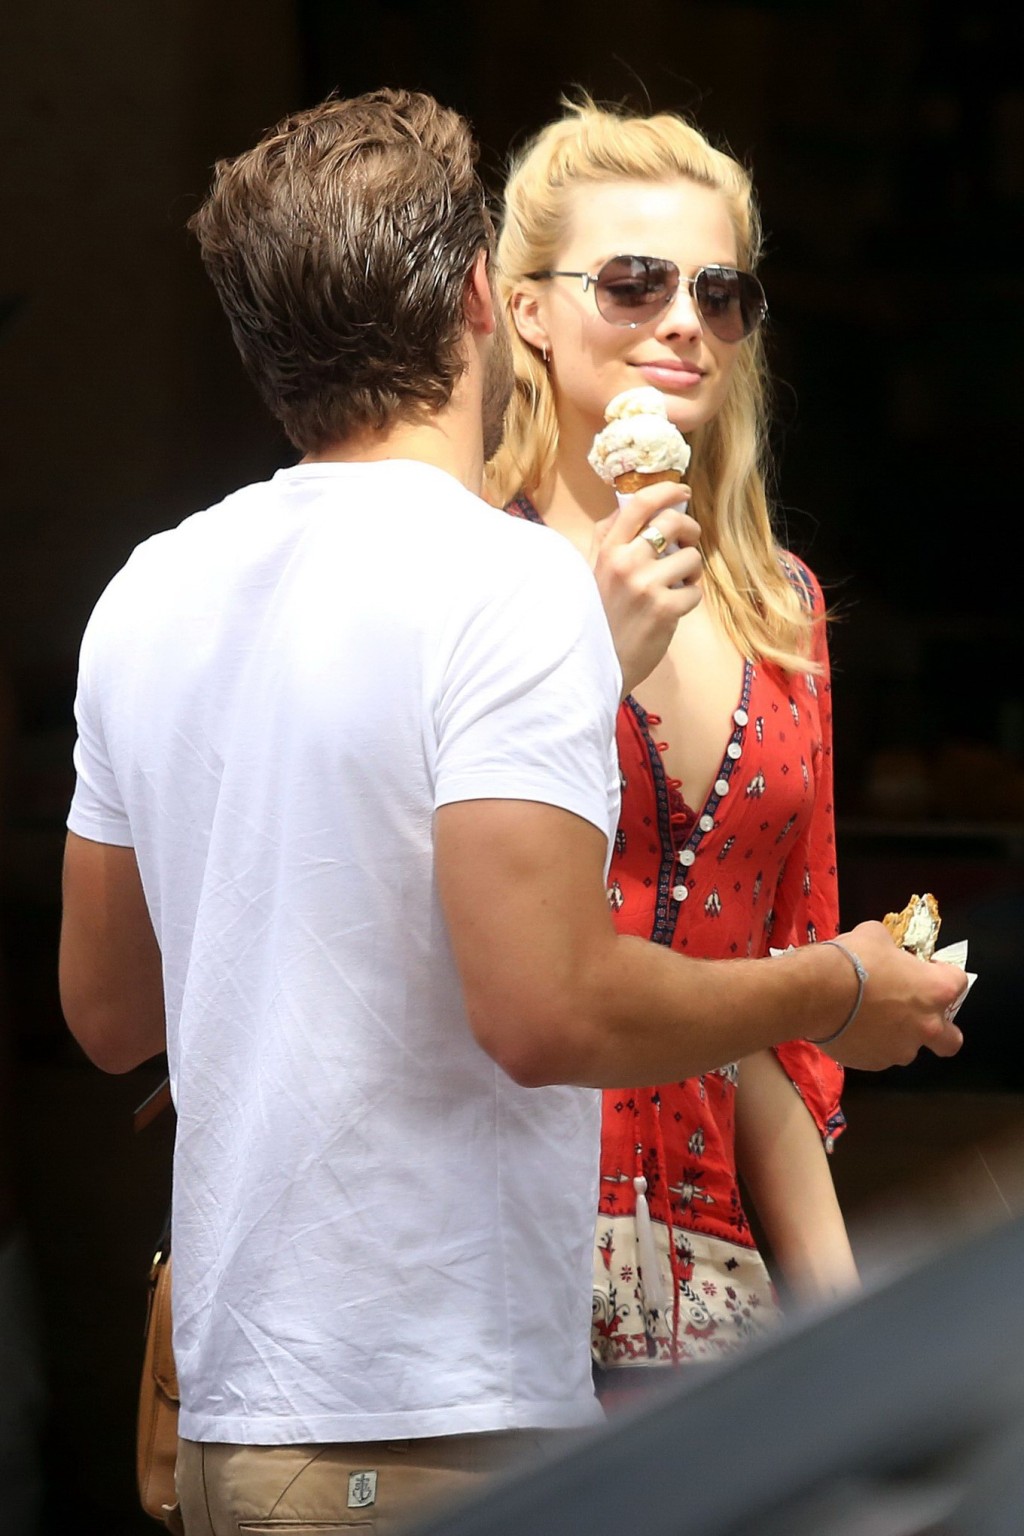 Margot Robbie cleavy licking an ice cream &amp;amp; getting ass groped #75161068